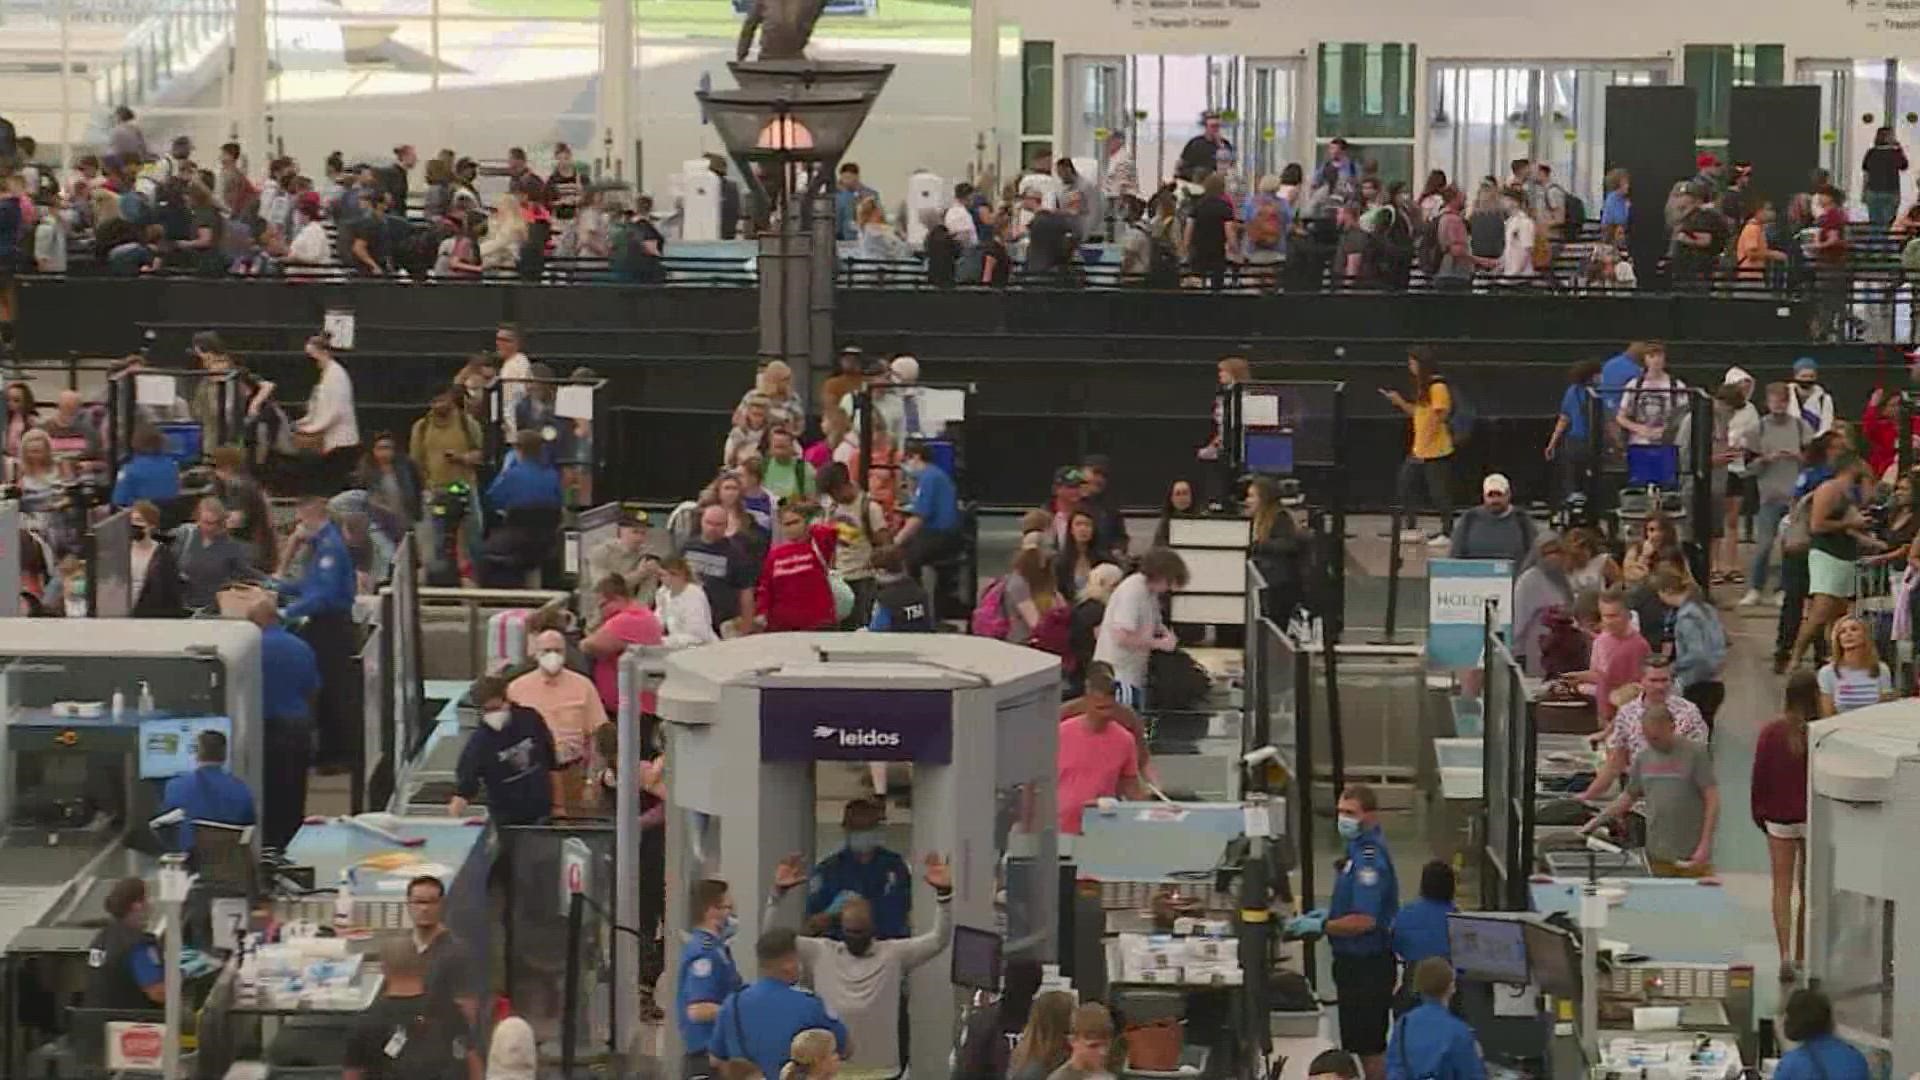 There have been thousands of delays and cancelations across the country during the holiday on Monday.